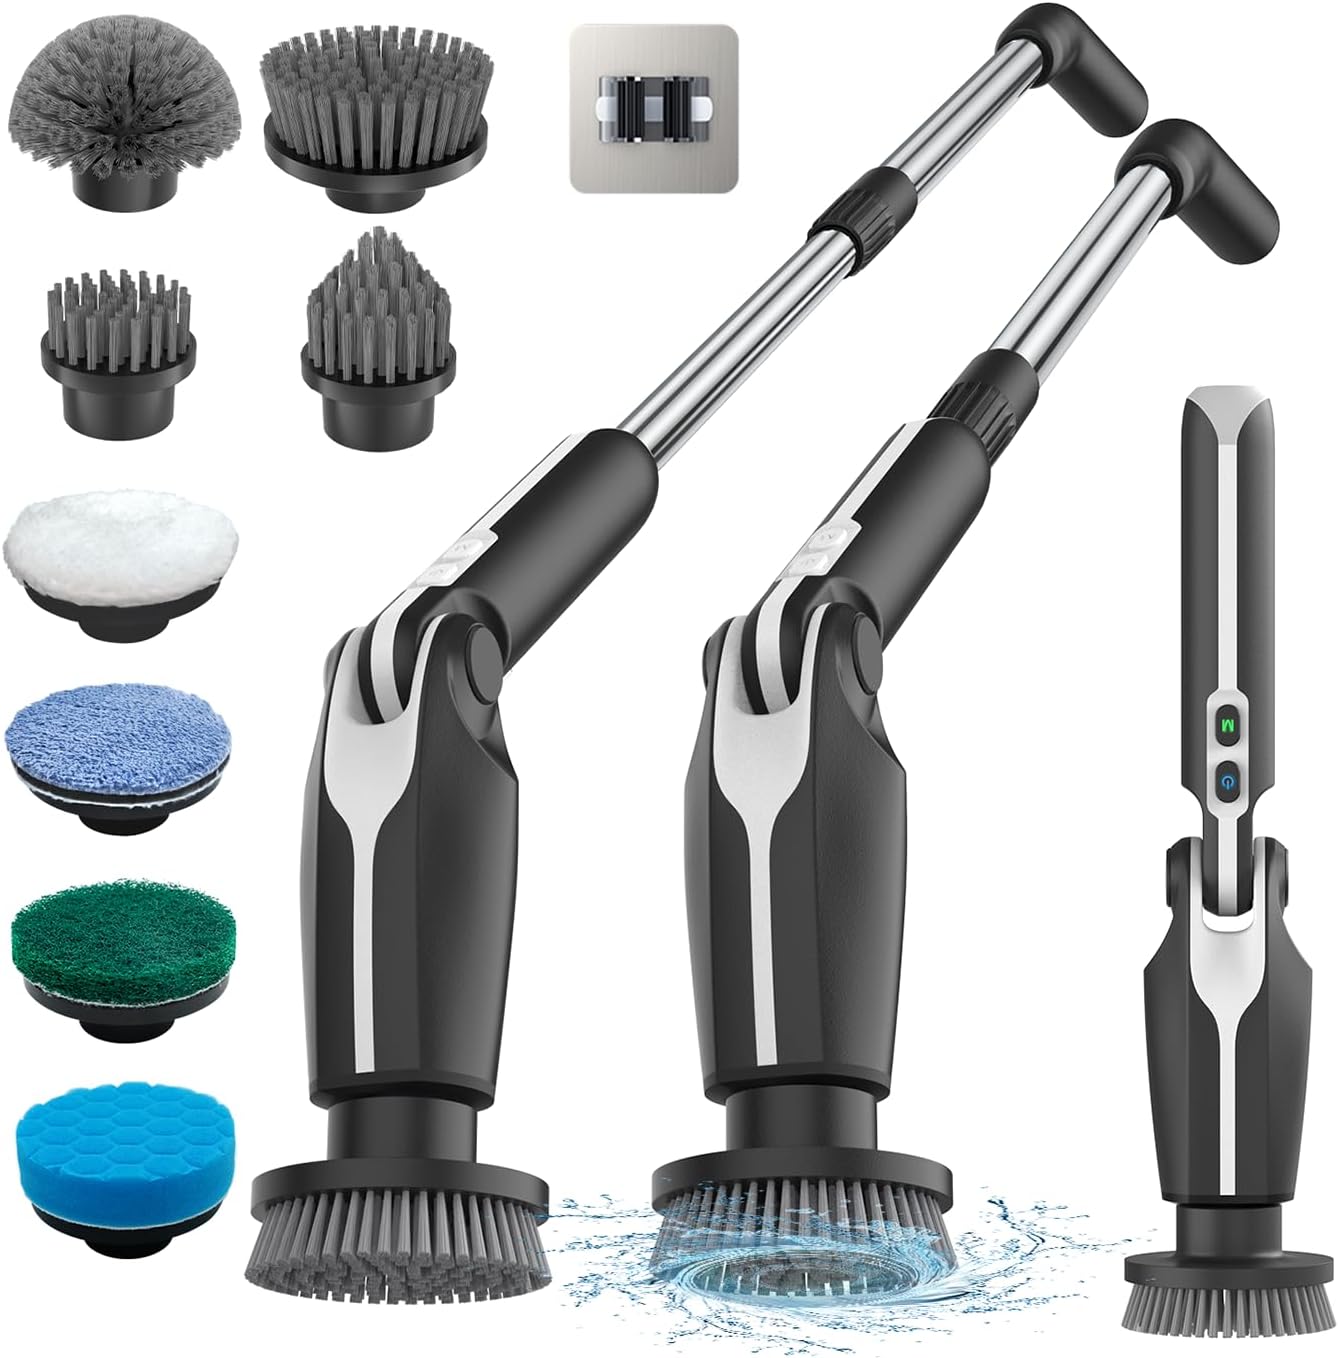 Electric Spin Scrubber with Long Handle & 8 Replaceable Brush Heads, Remote Control Shower Cleaner Brush (Black)